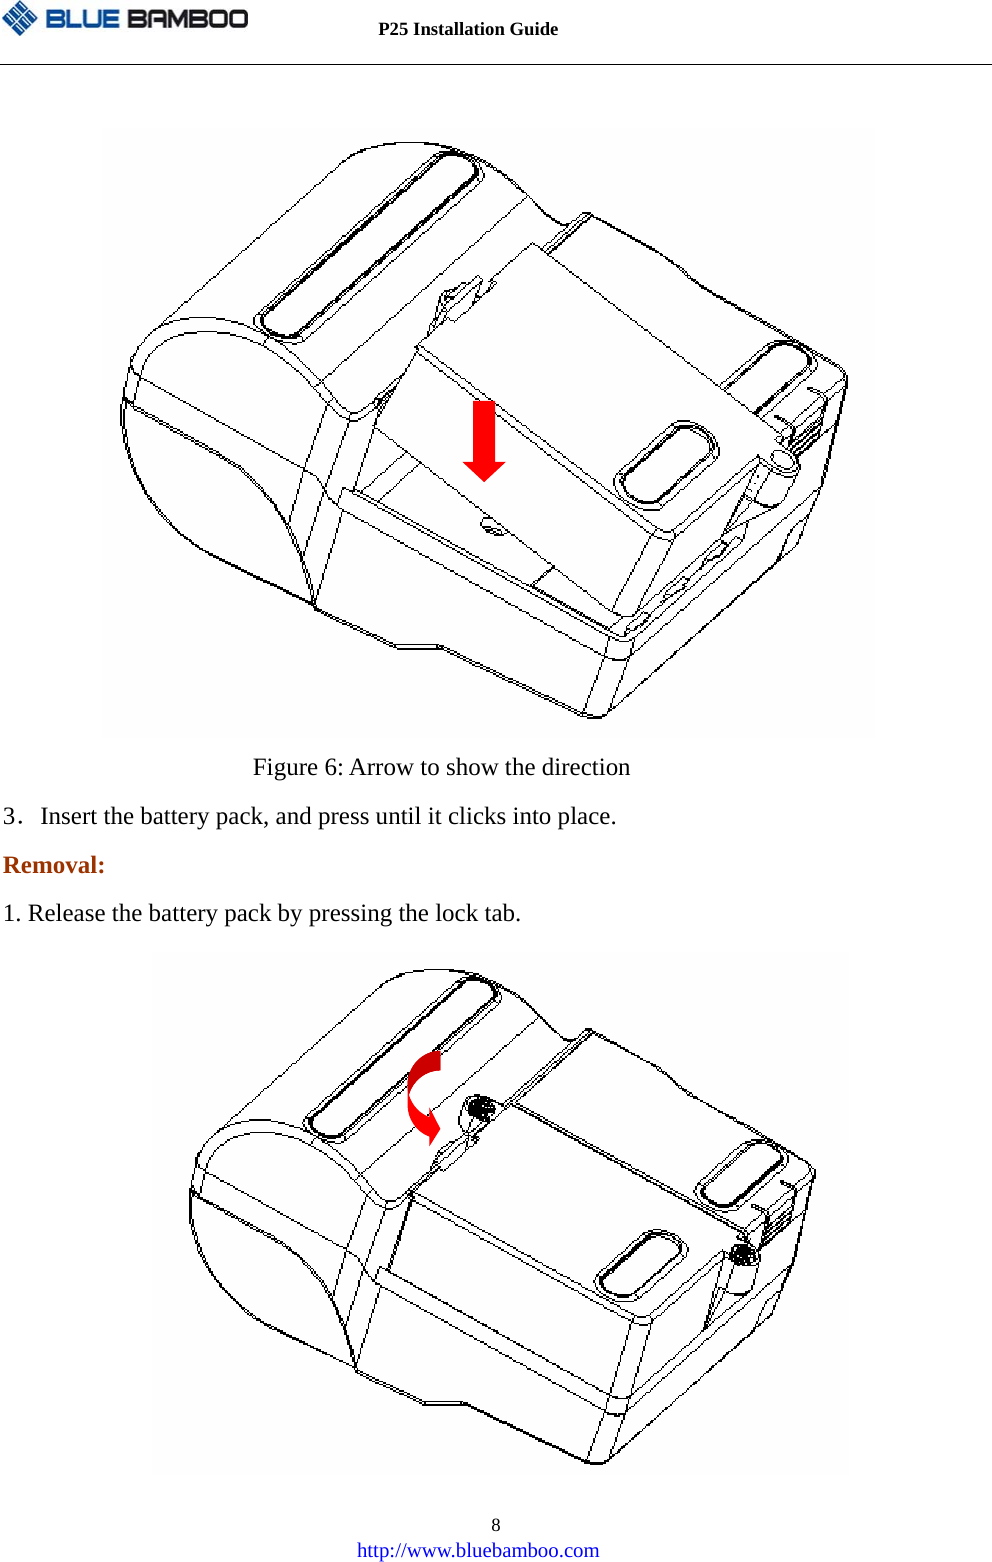          P25 Installation Guide   http://www.bluebamboo.com 8                              Figure 6: Arrow to show the direction 3．Insert the battery pack, and press until it clicks into place. Removal: 1. Release the battery pack by pressing the lock tab.               